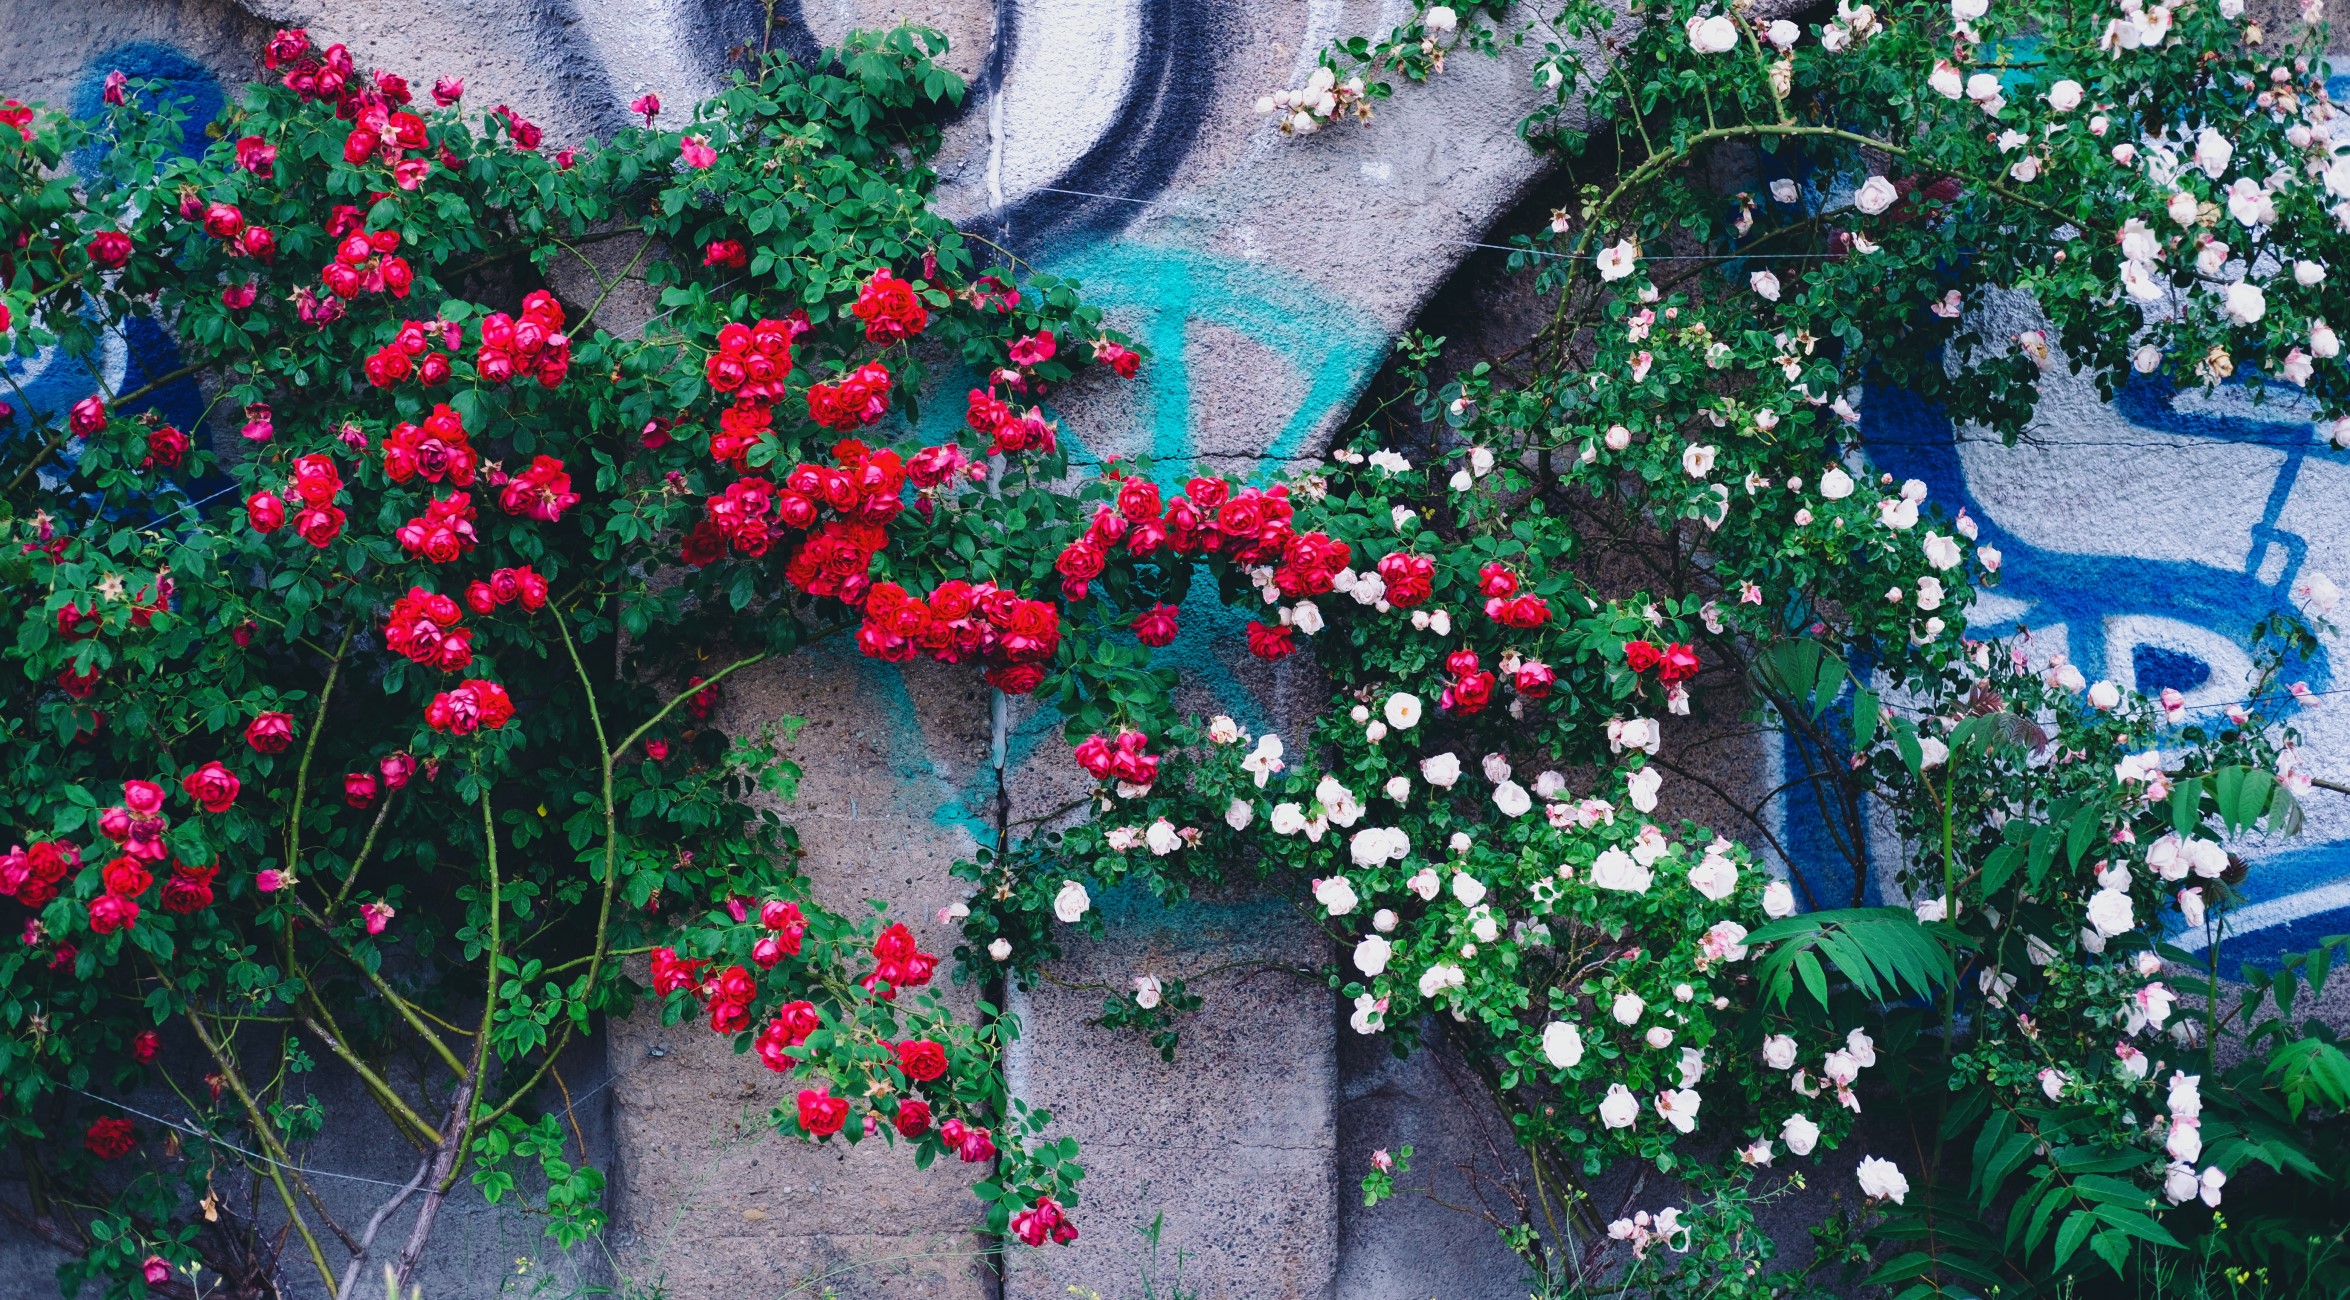 Red and white roses climbing up a graffitied concrete wall